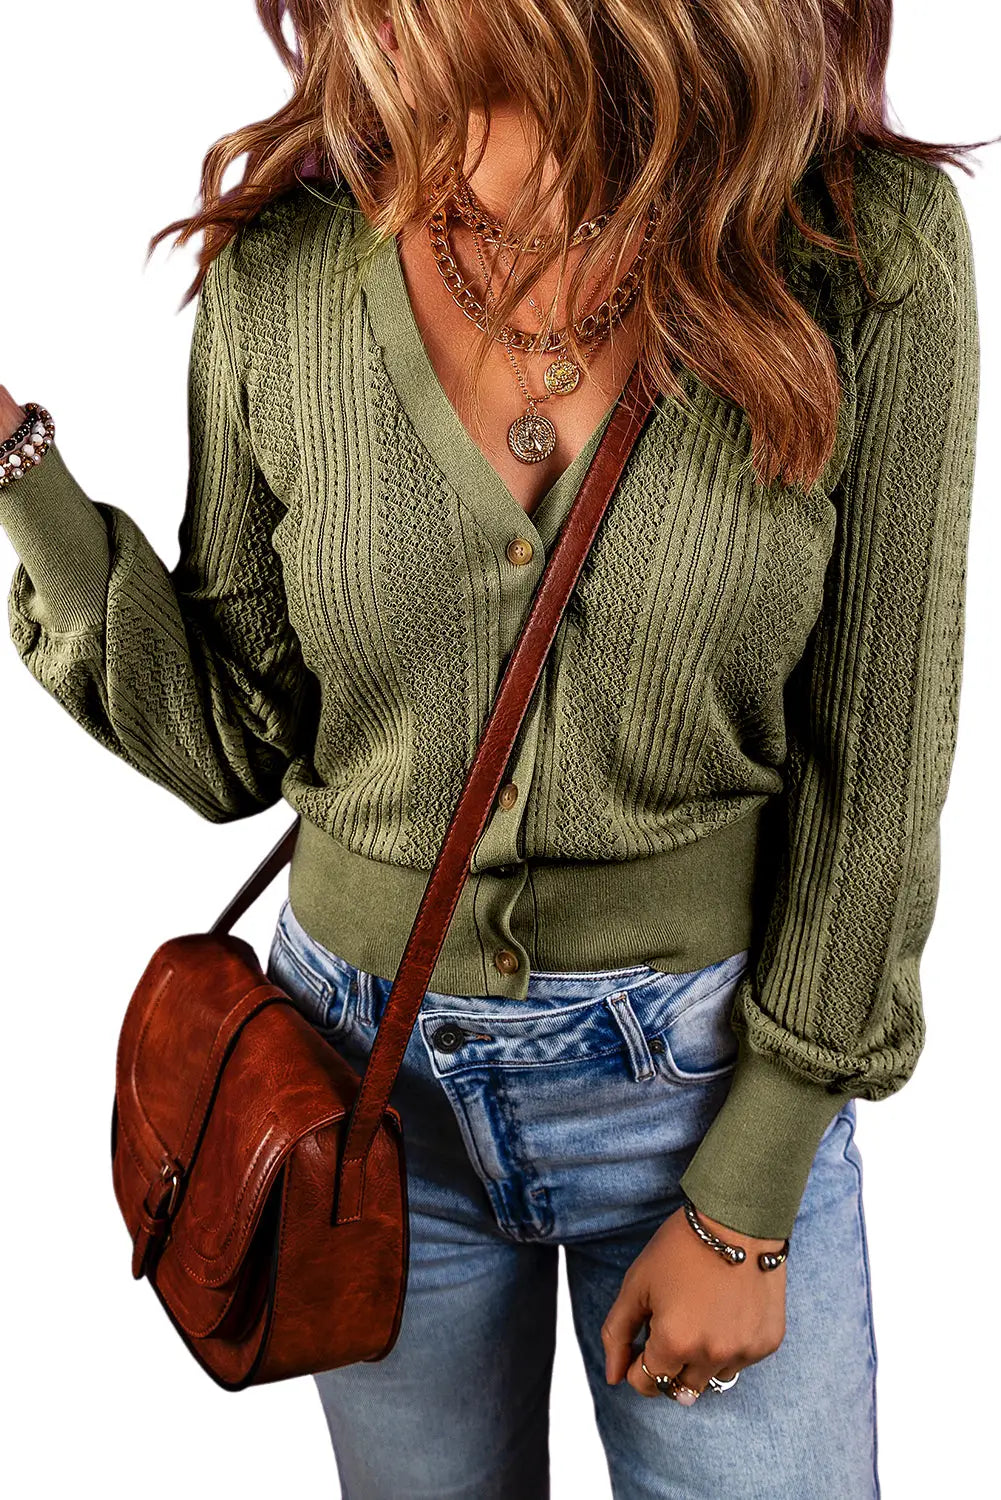 V neck buttoned textured sweater cardigan - sweaters & cardigans